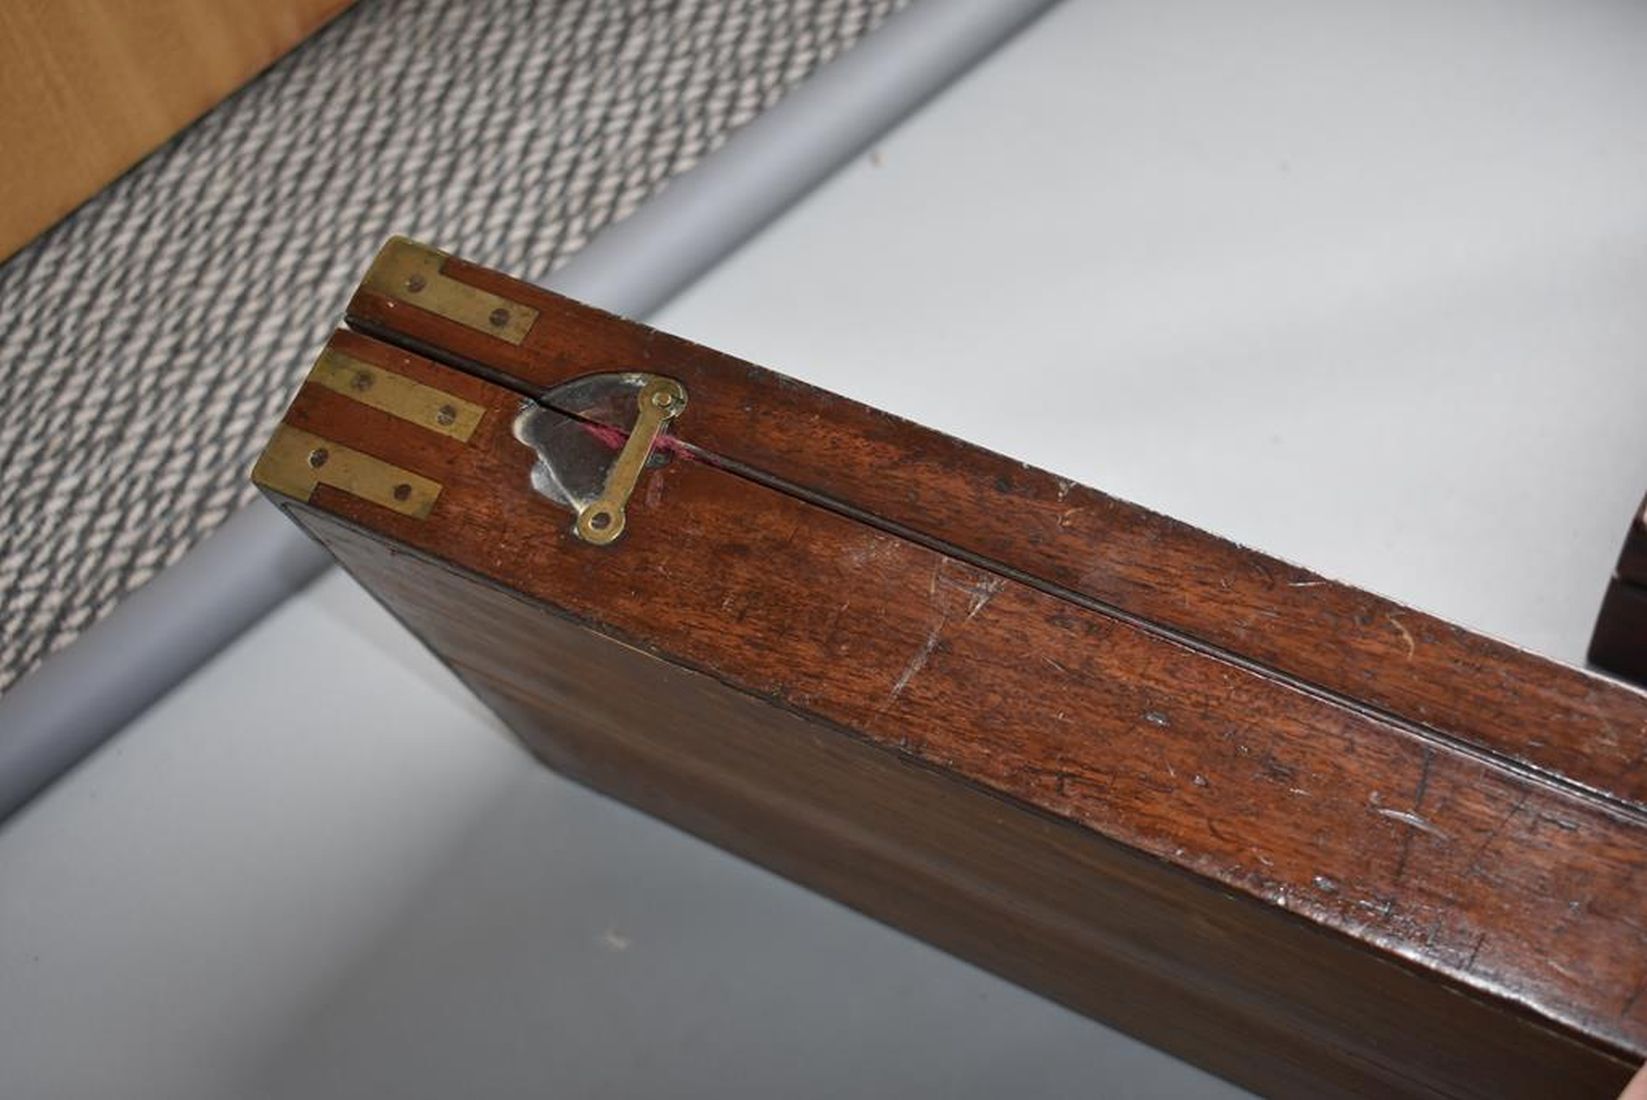 A BRASS BOUND MAHOGANY SPORTING GUN CASE, for a gun with 32inch barrels, red felt lining, partitions - Image 5 of 8